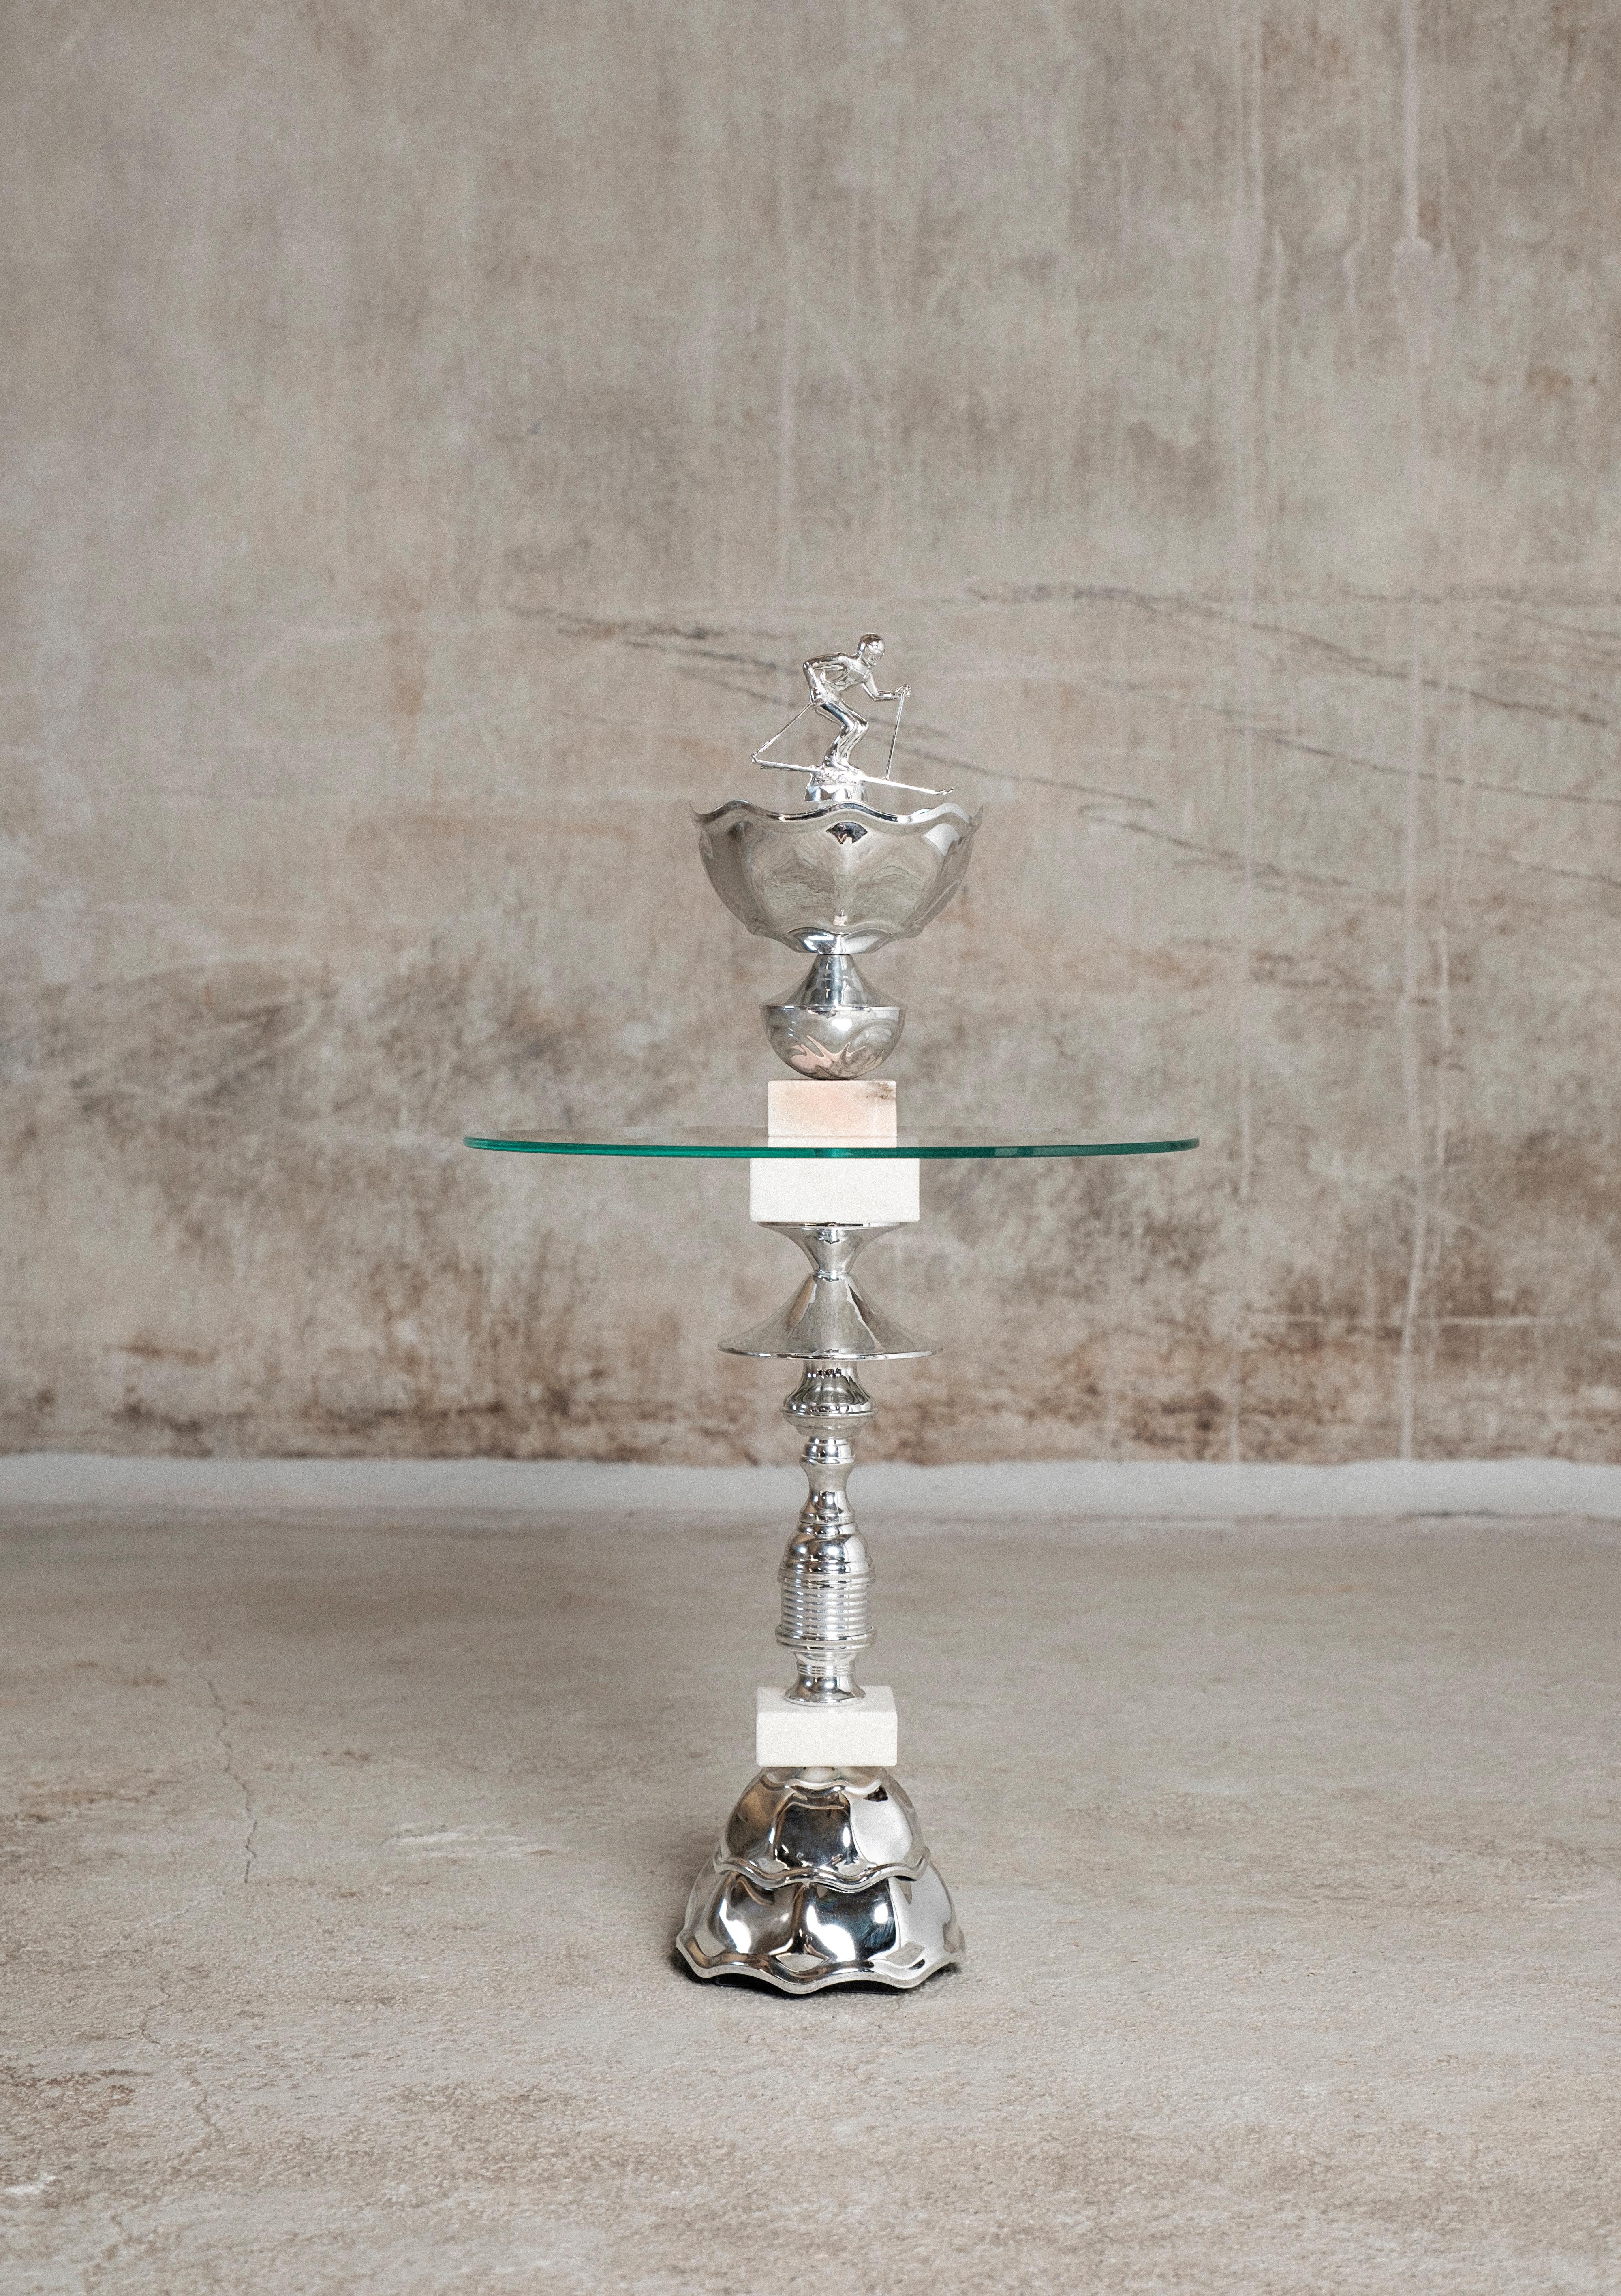 The Alpine Skier table by Flétta
Dimensions: 74 x 46 cm
Materials: silver, white, rose marble

Trophy is a collection of tables, lights, flowerpots and shelves made of old trophies collected from athletes and sports clubs in Iceland. Trophies